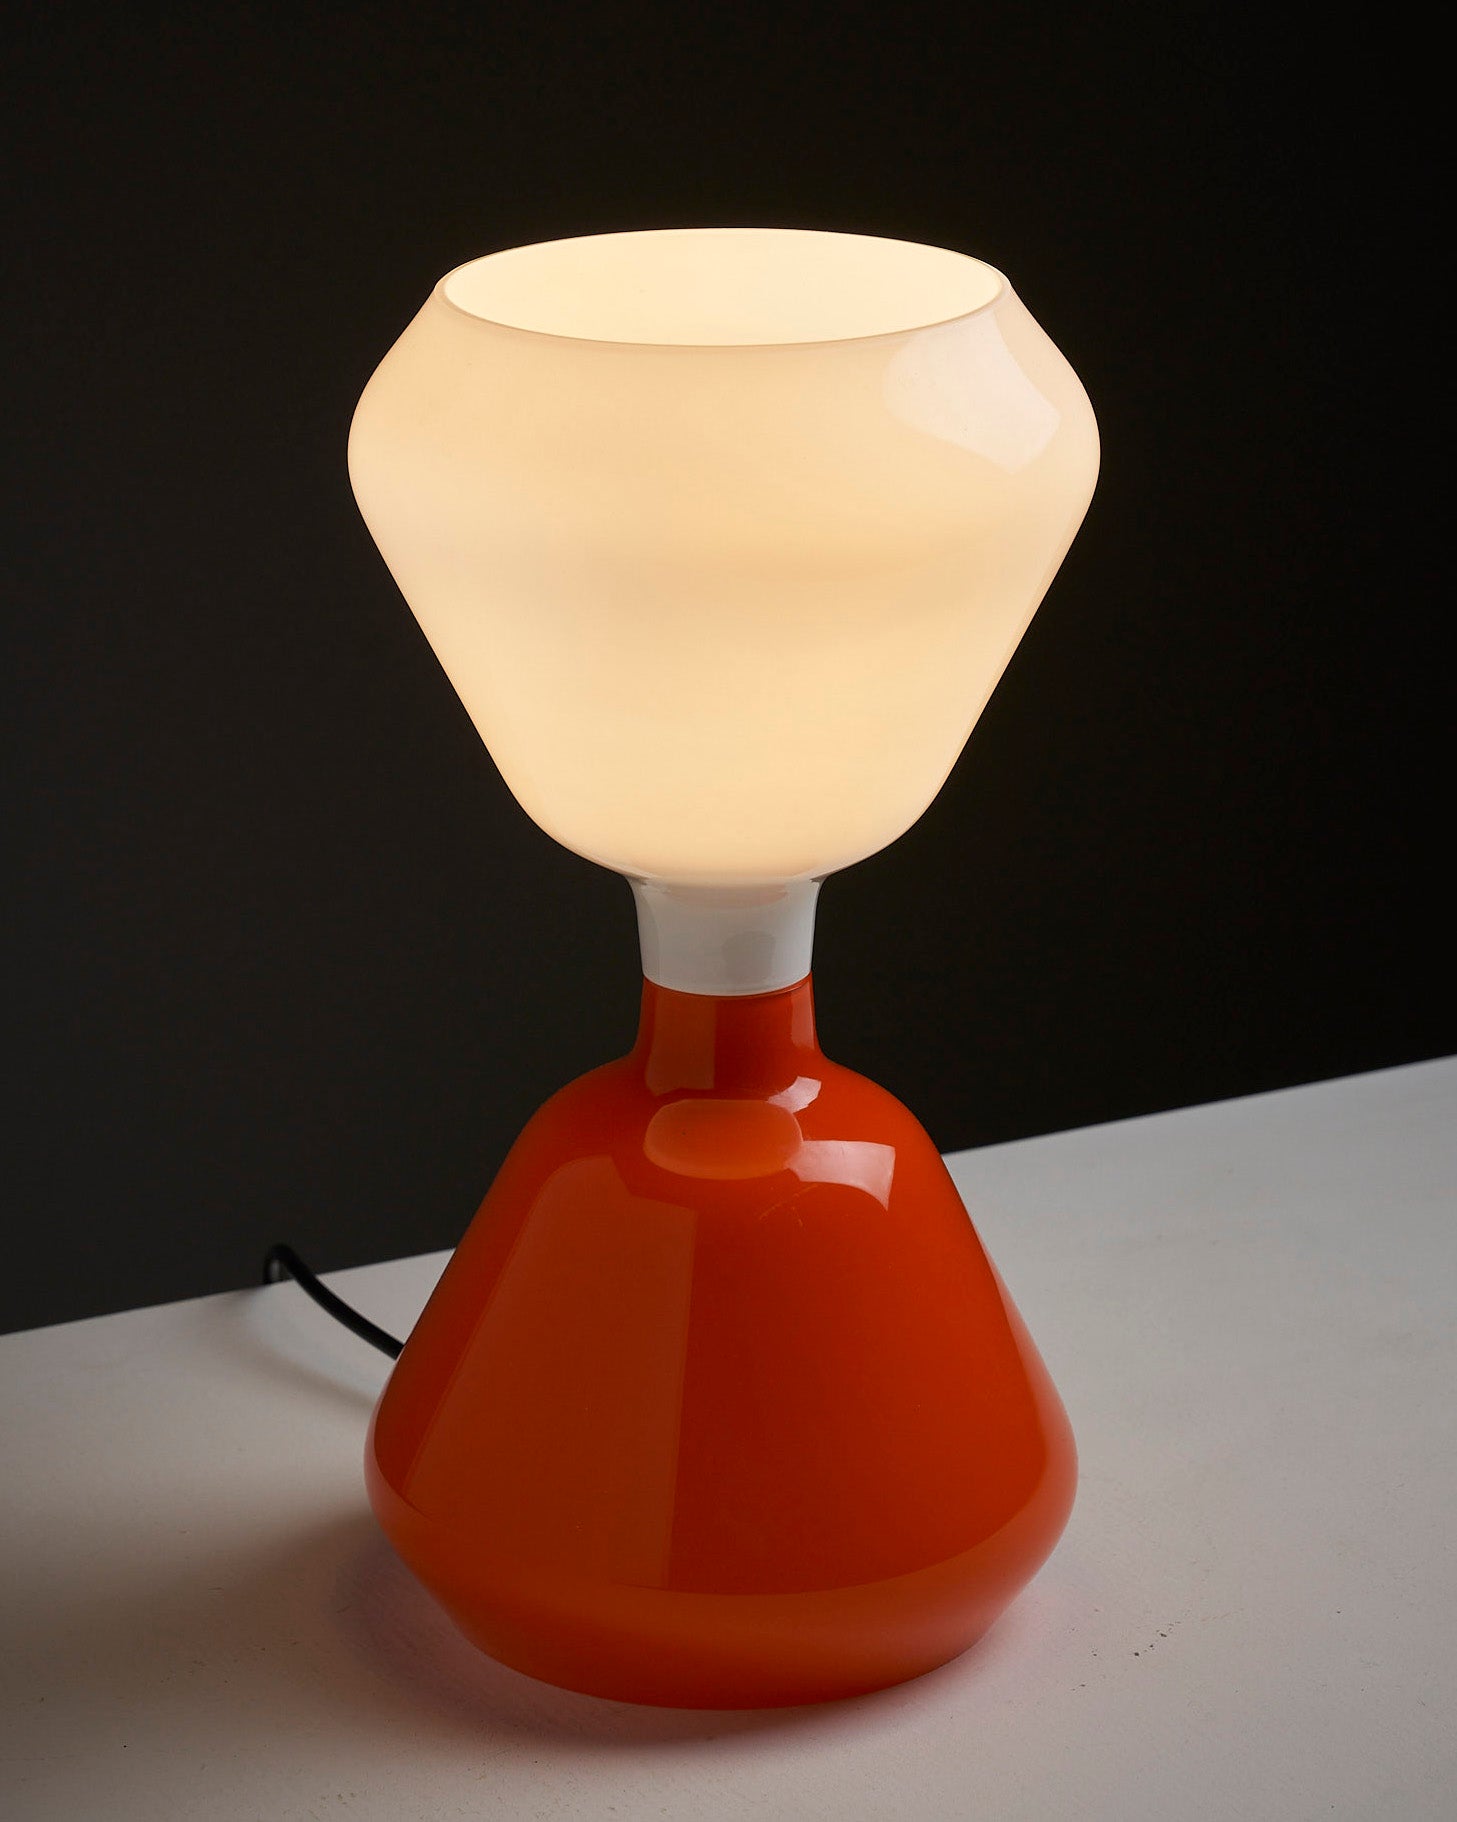 Table Lamp in orange and opal glass By Peter Pelzel for the brand Vistosi Italy